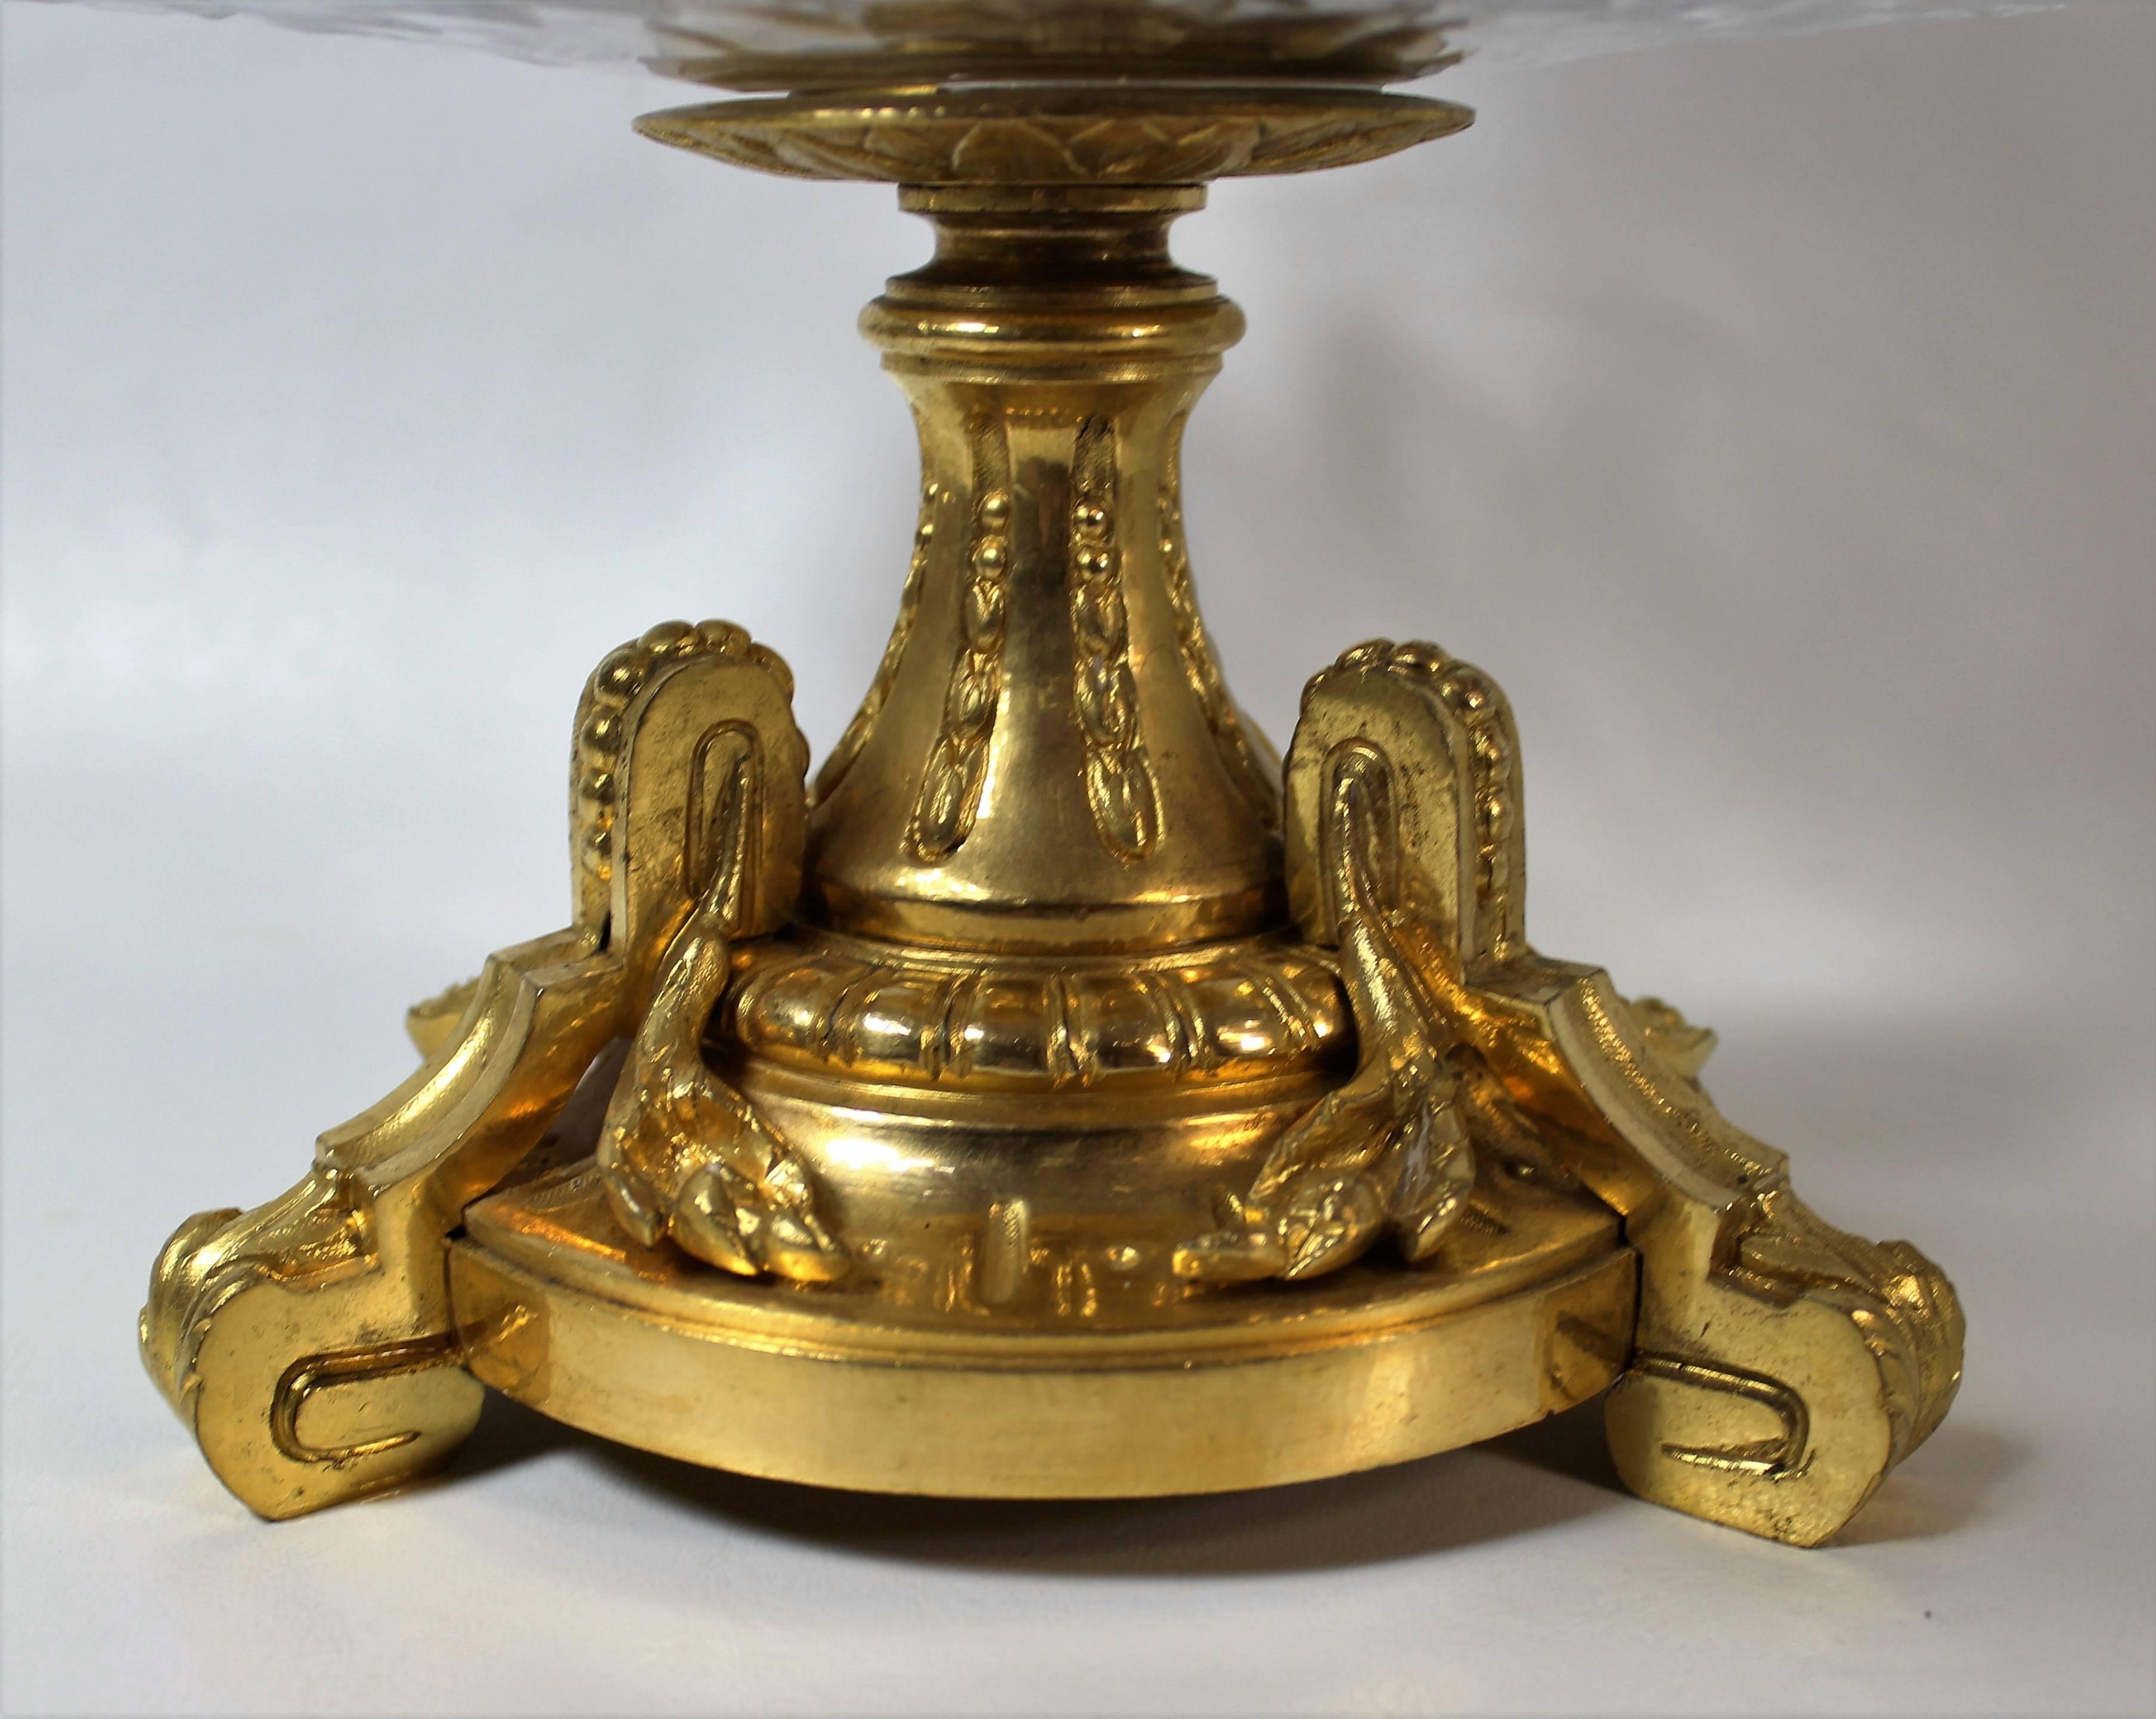 French Gilt Bronze & Cut Crystal Two-Tier Surtout De Table or Centerpiece Tazza In Good Condition For Sale In Hamilton, Ontario